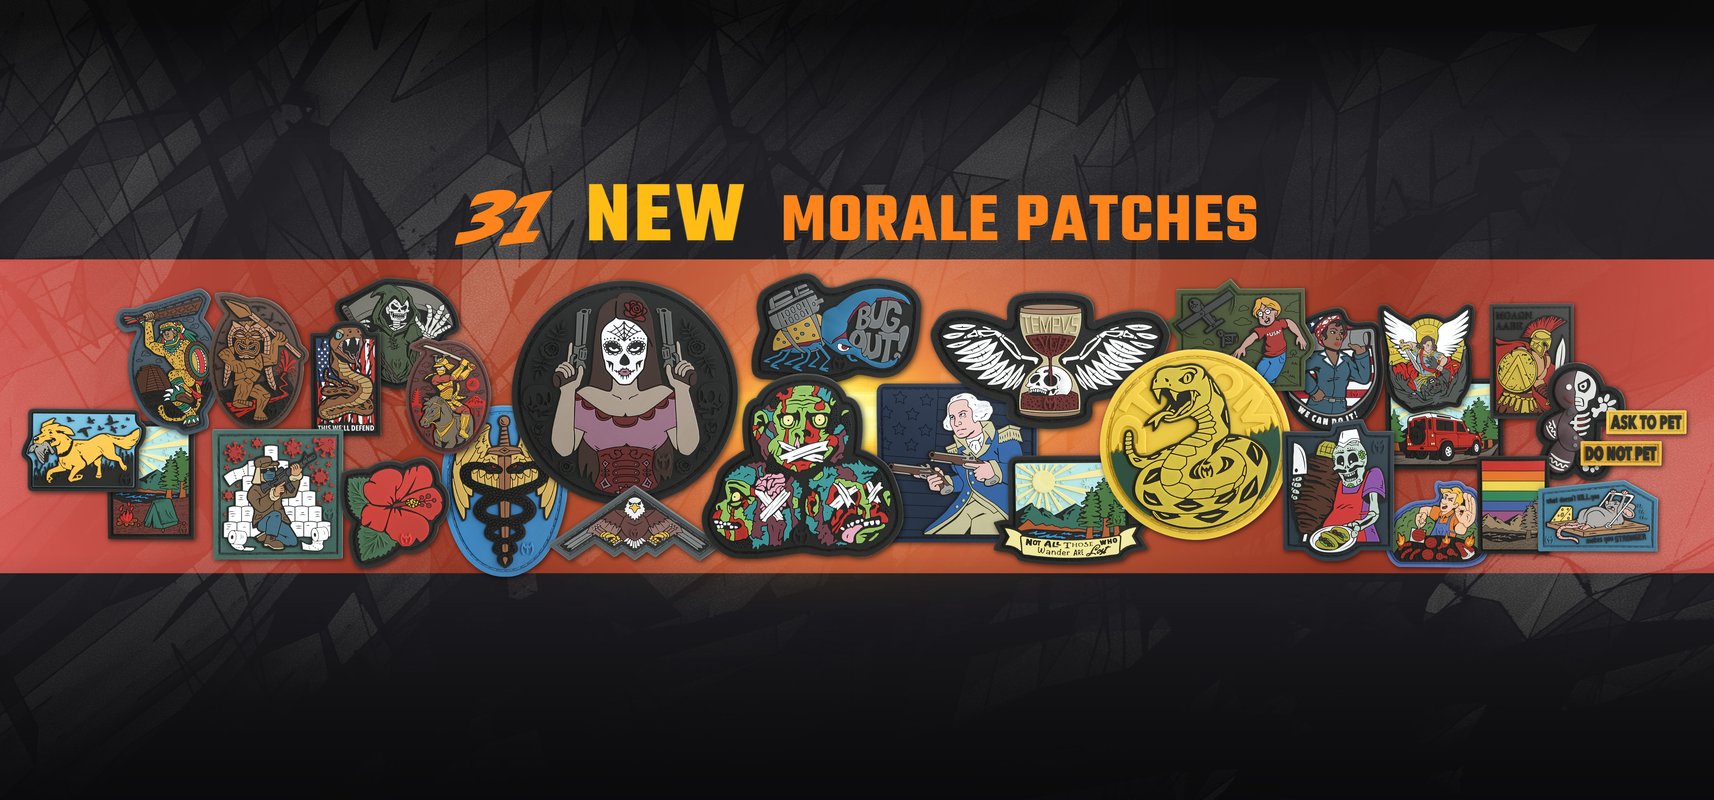 31 New Morale Patches